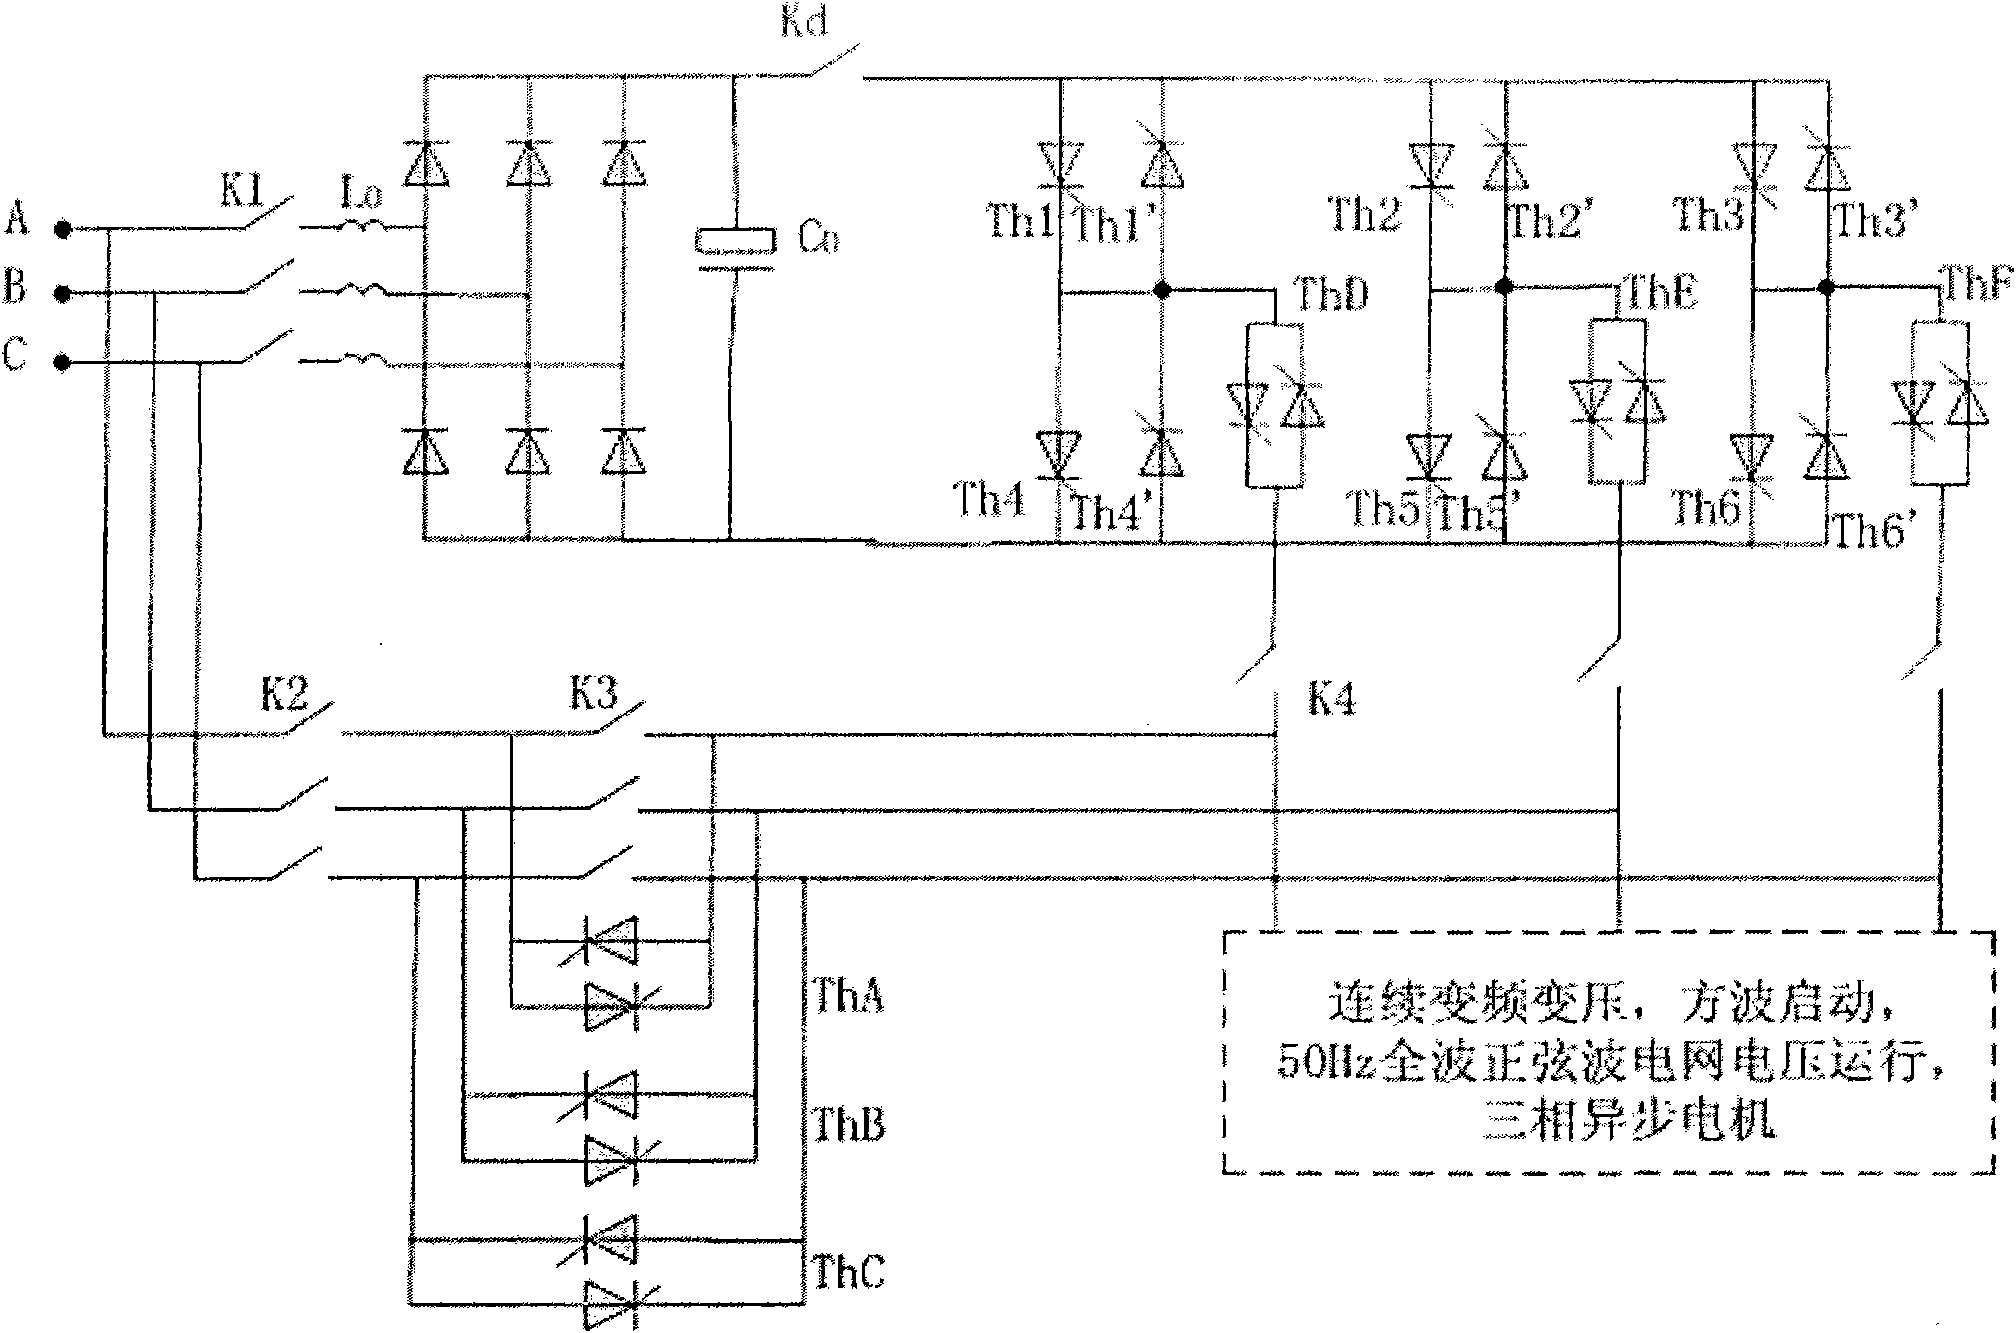 Soft starter used for continuous frequency conversion and voltage transformation of motor